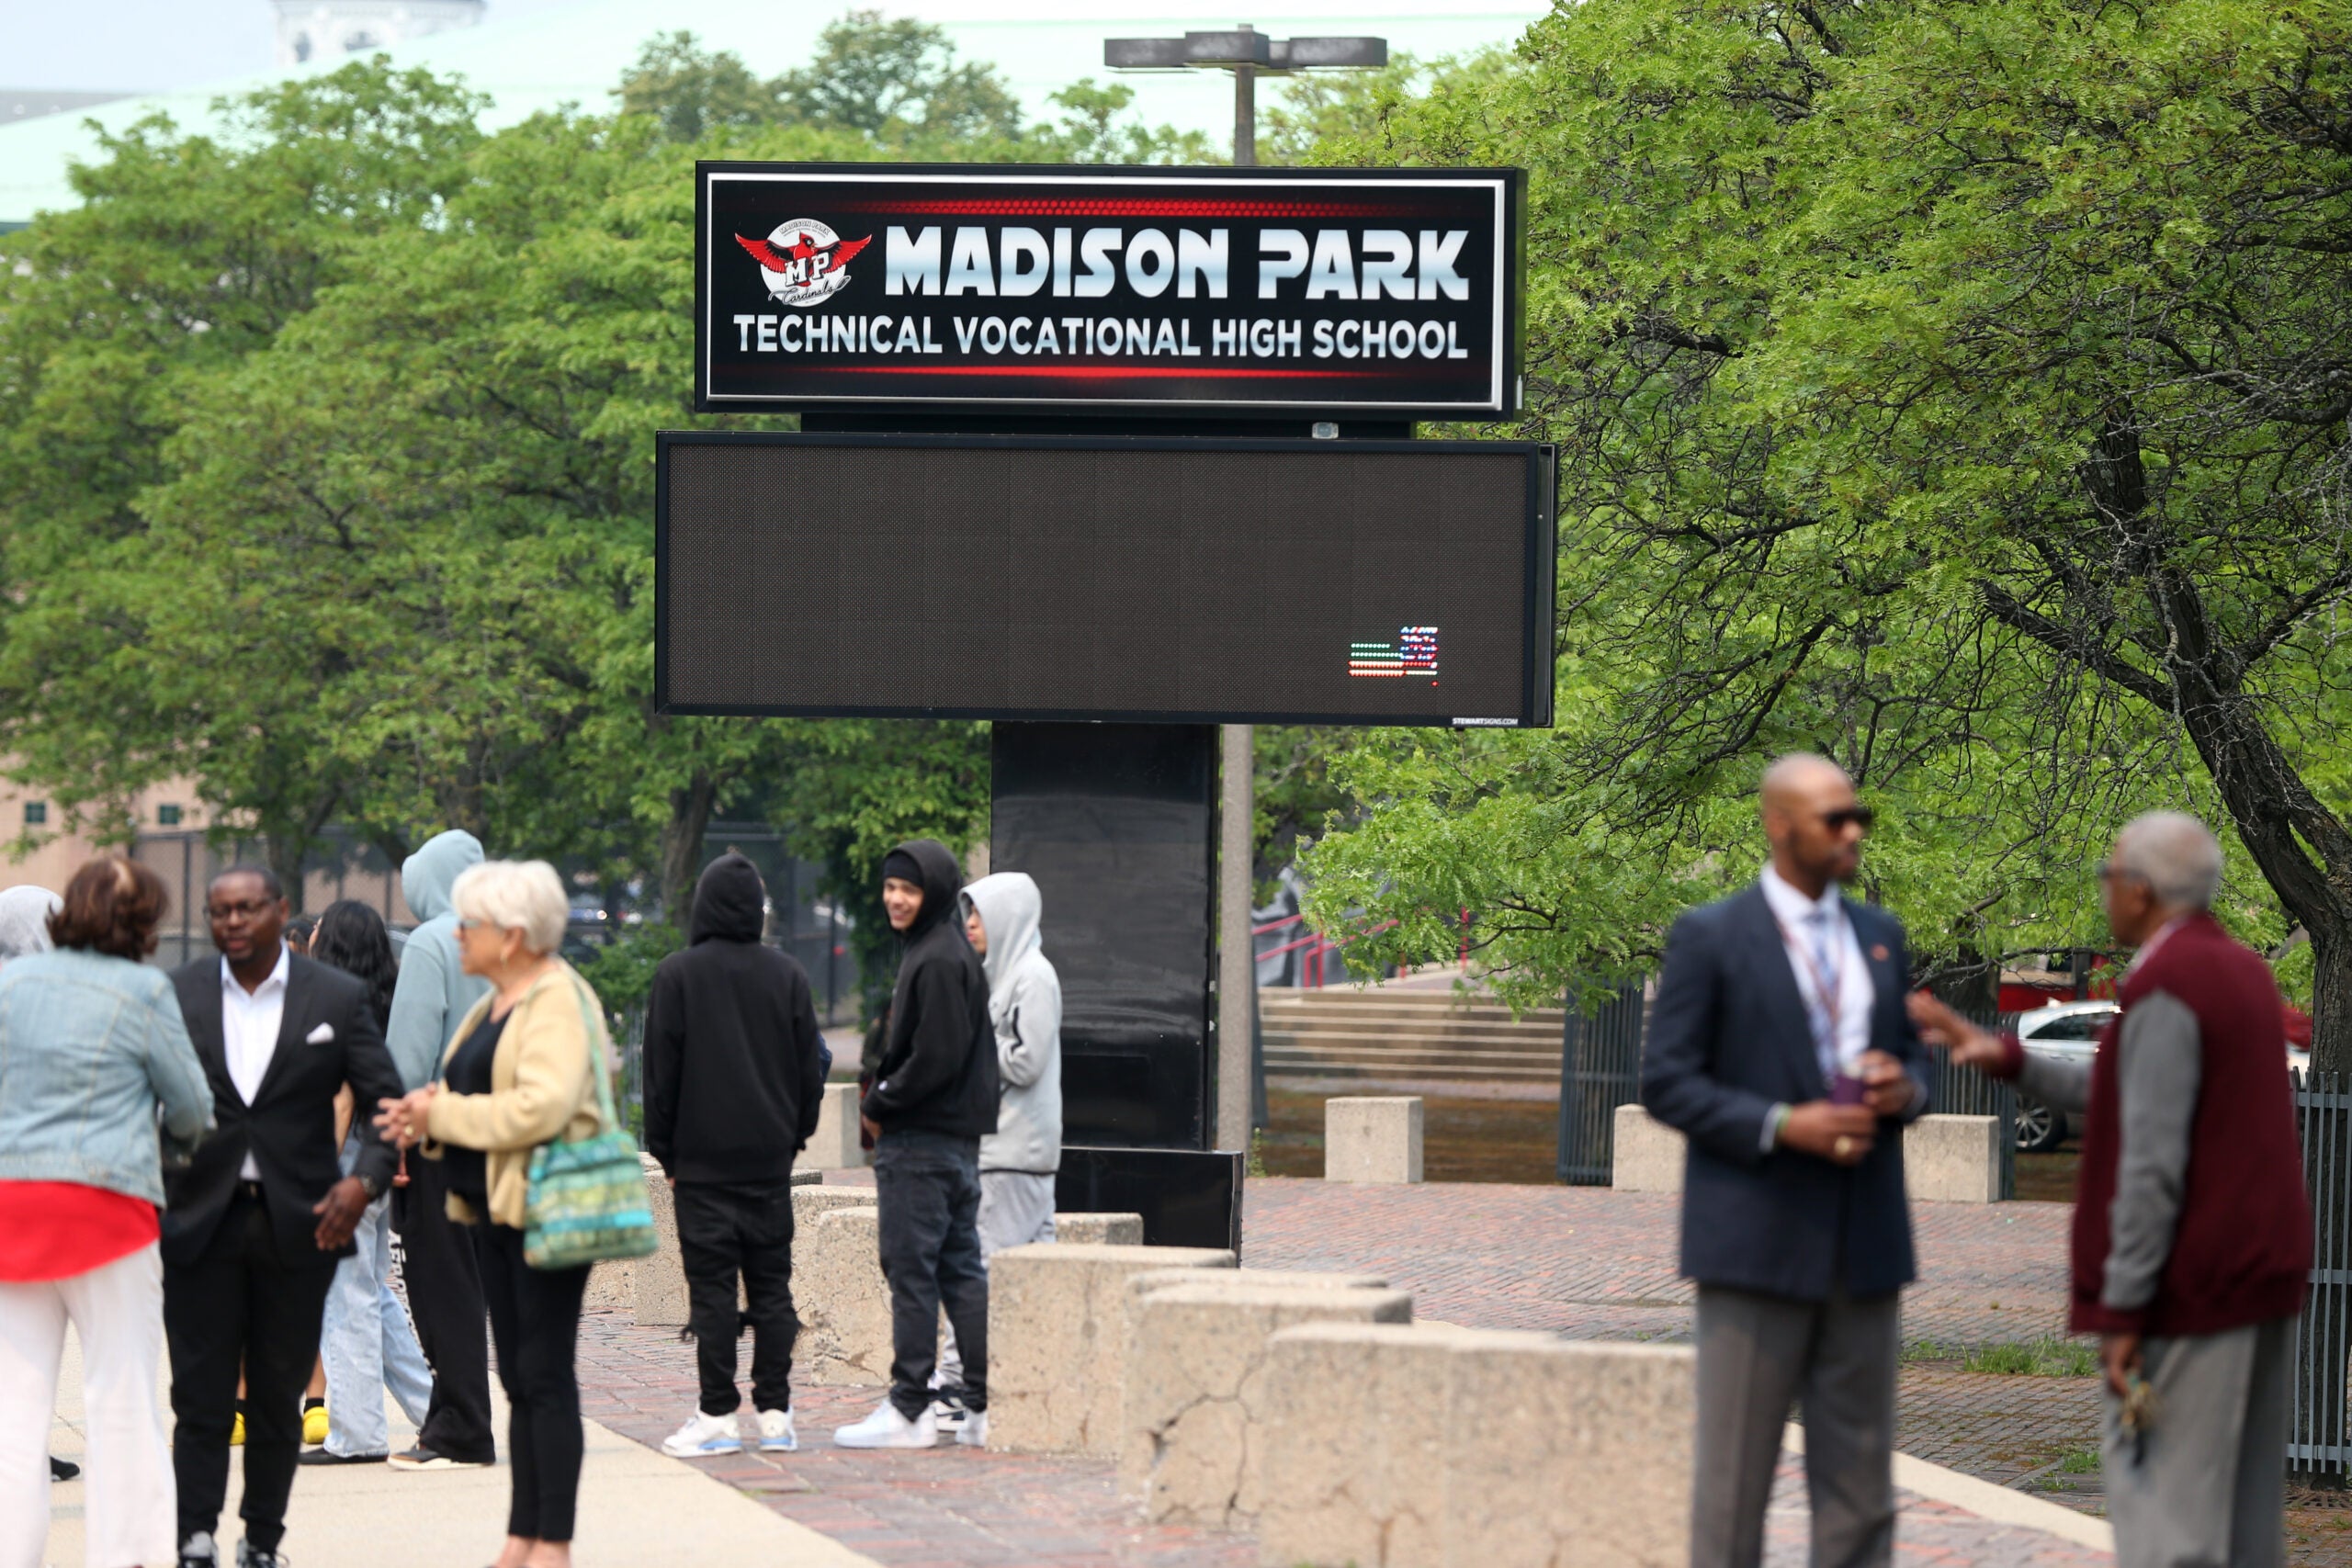 A few people are seen milling around an empty courtyard with a tall sign that reads "Madison Park Technical Vocational High School."